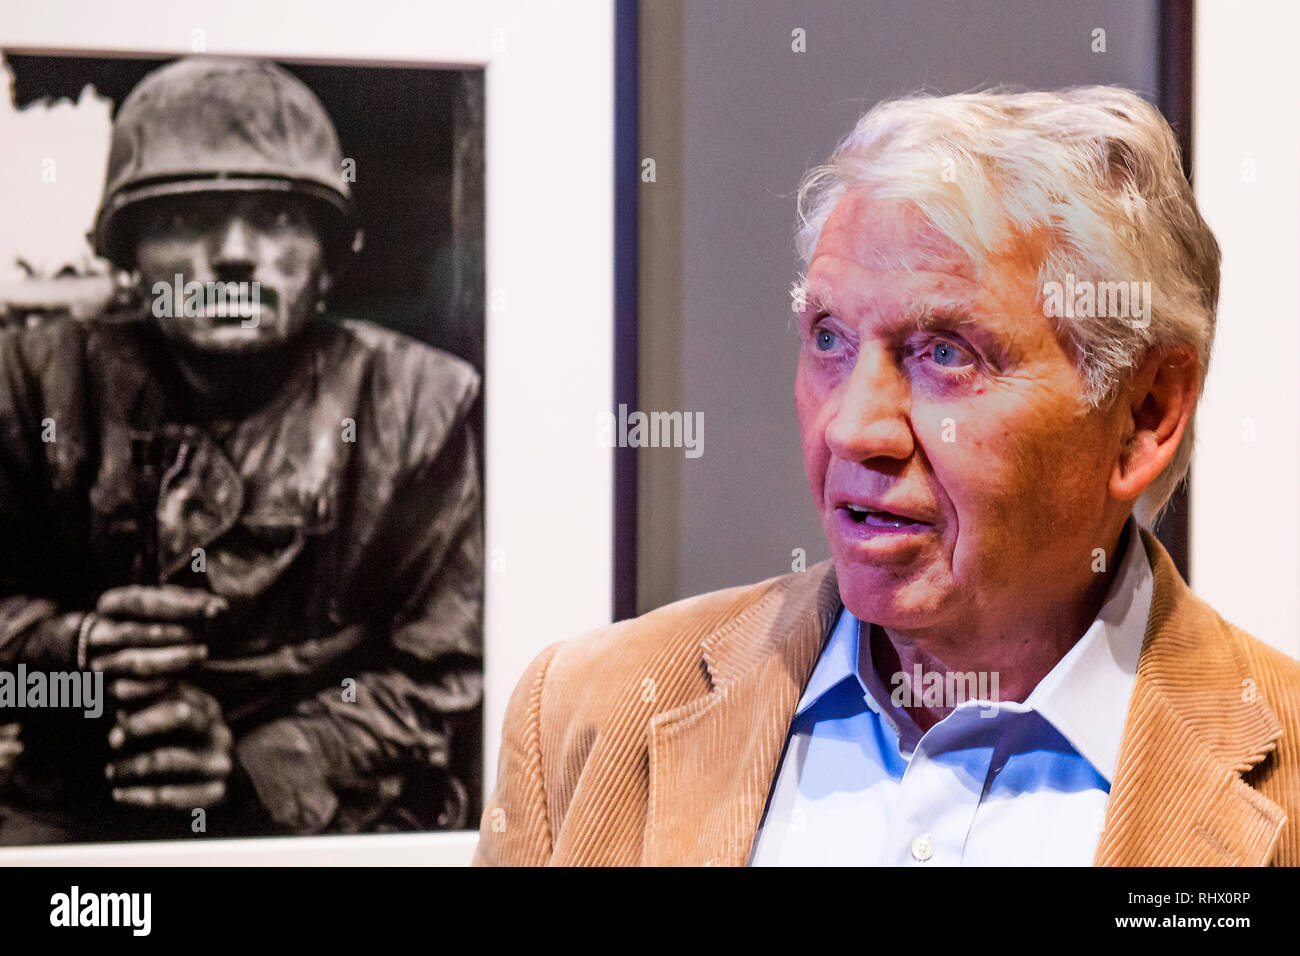 London, UK. 4th February, 2019. Sir Don McCullin - A retrospective of the British photographer Sir Don McCullin at Tate Britain. With over 250 photographs, all printed by the artist himself in his own darkroom. Often taken at great personal risk, his conflict photographs are shown alongside his work in documentary photography, his travel assignments and his long term engagement with landscape and still life. The exhibition runs from 5 Feb to 6 May 2019. Credit: Guy Bell/Alamy Live News Stock Photo